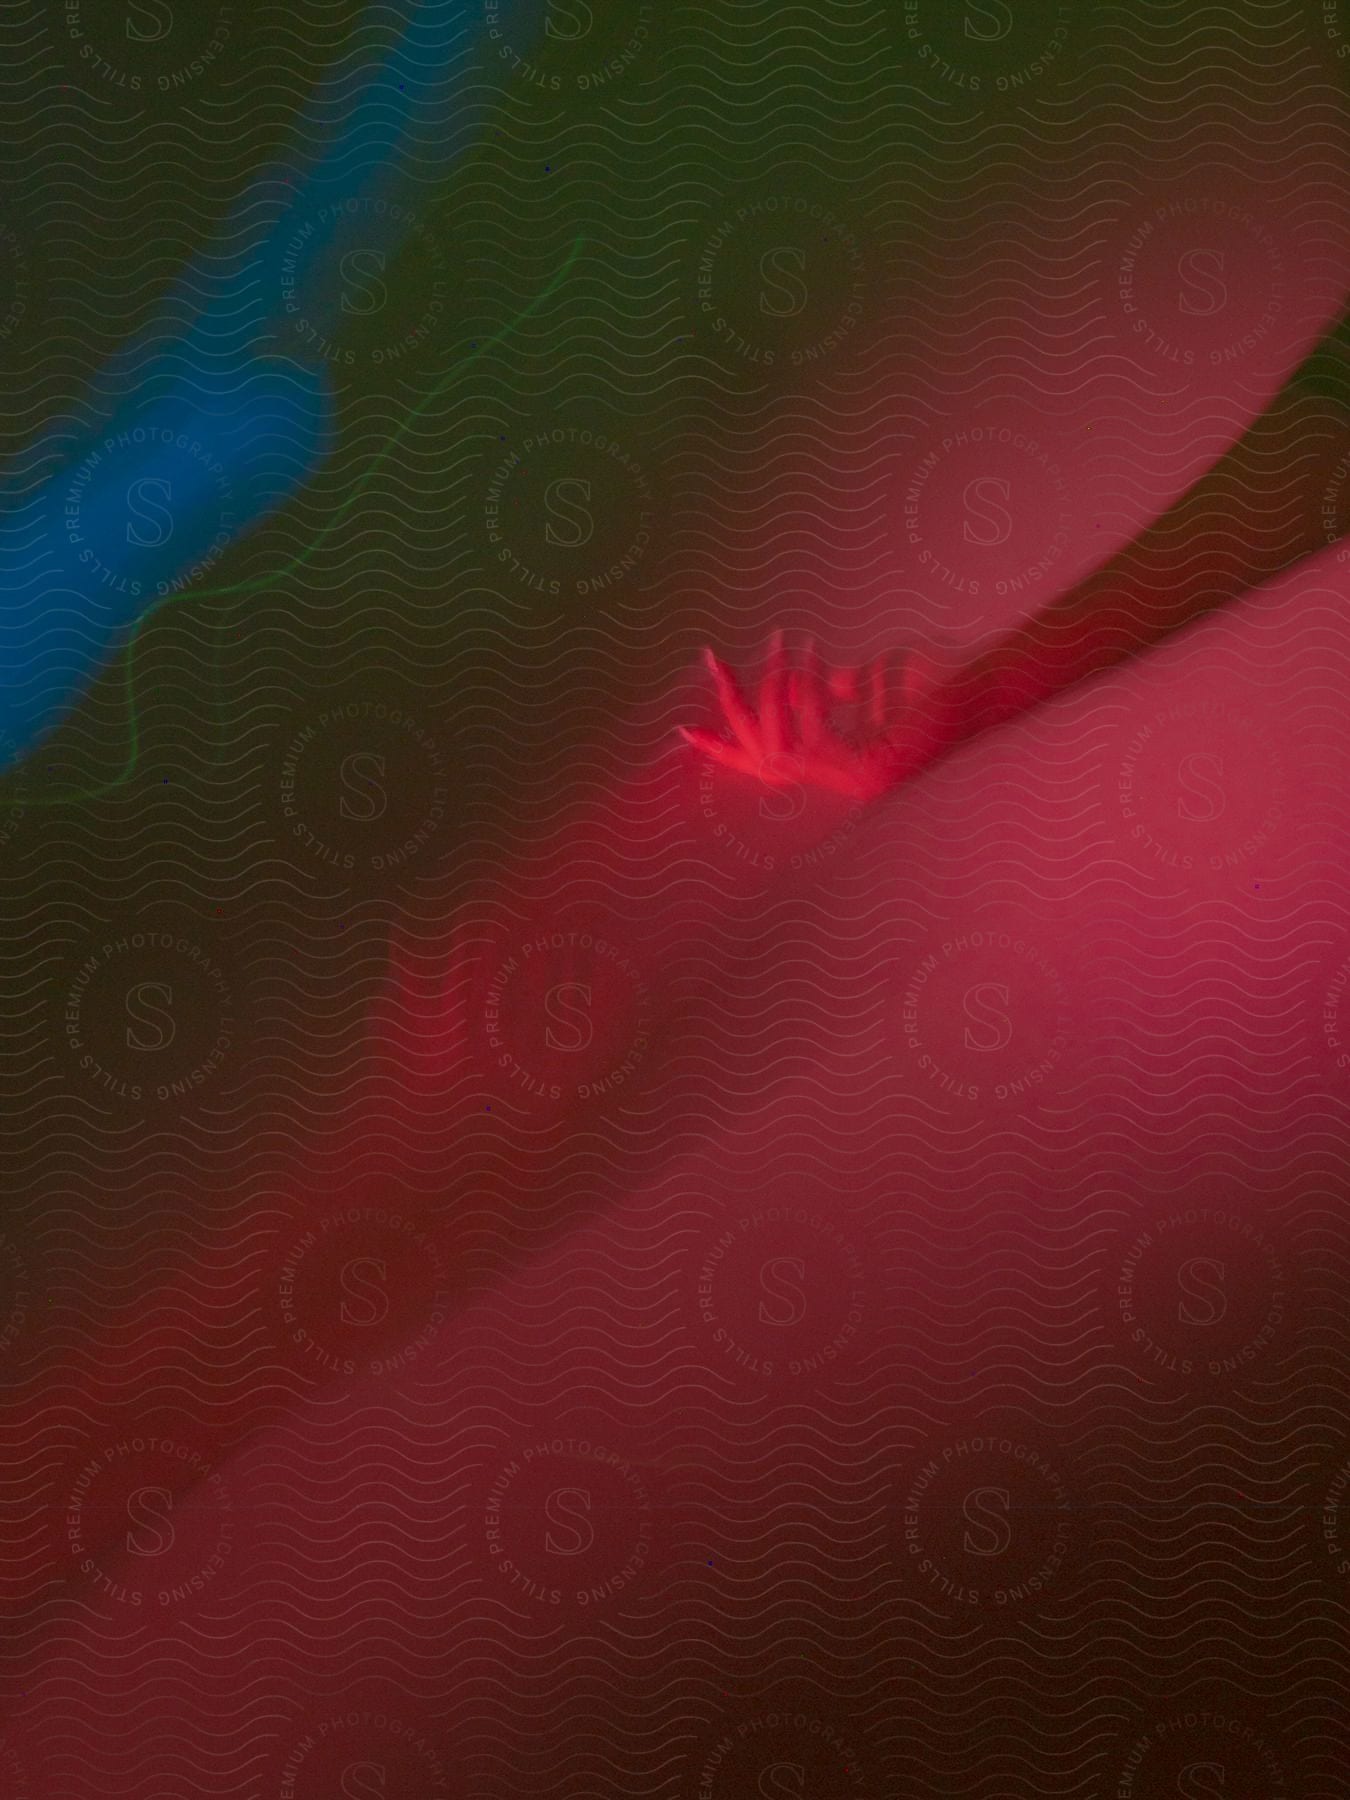 Blurry hand of a woman moving against a dark red background